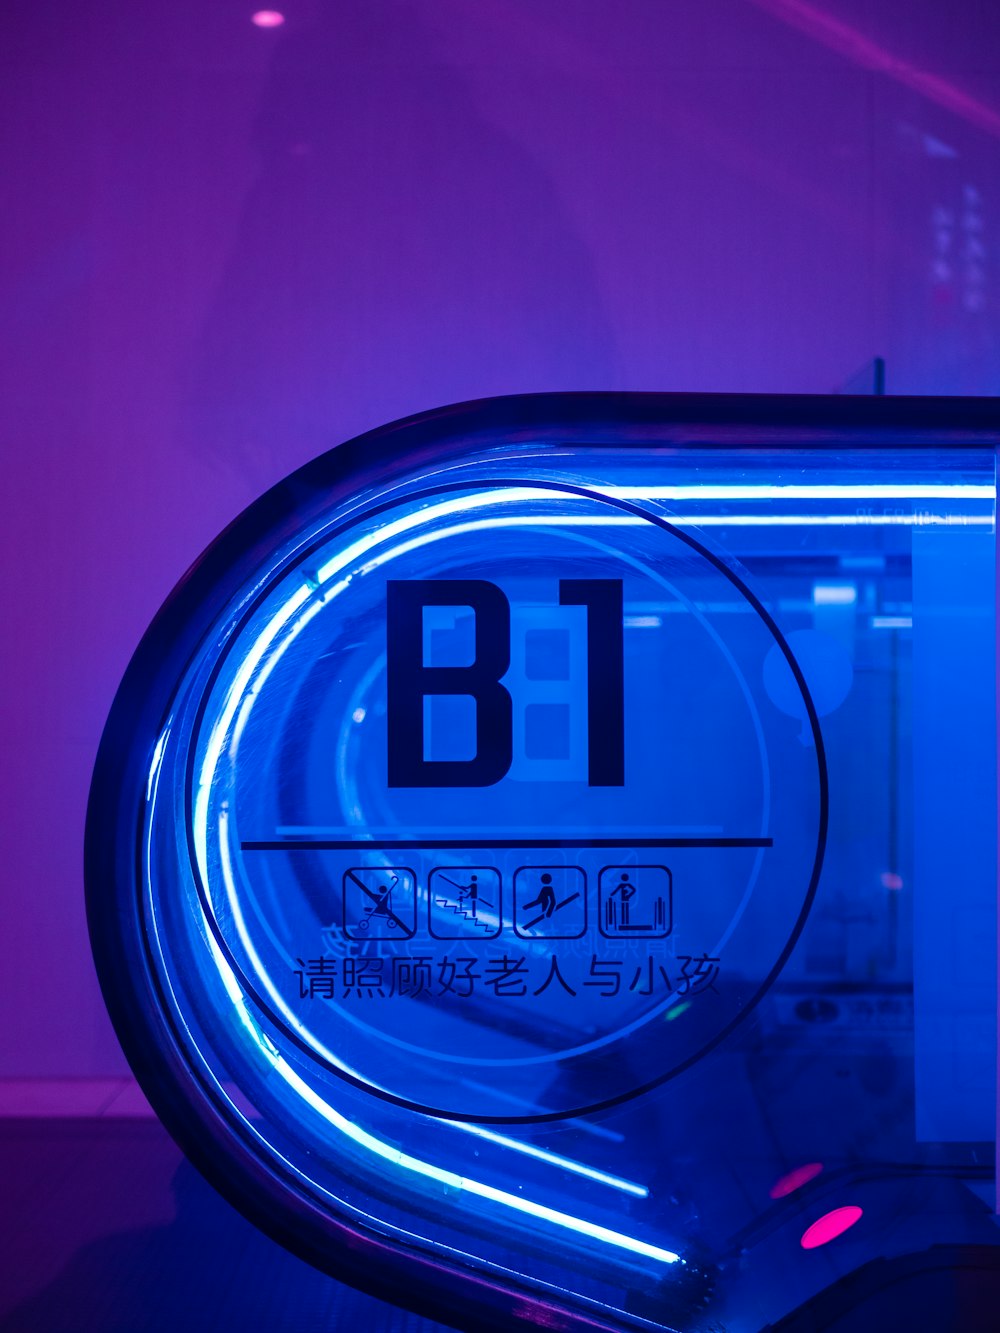 blue and white round digital clock at 12 00